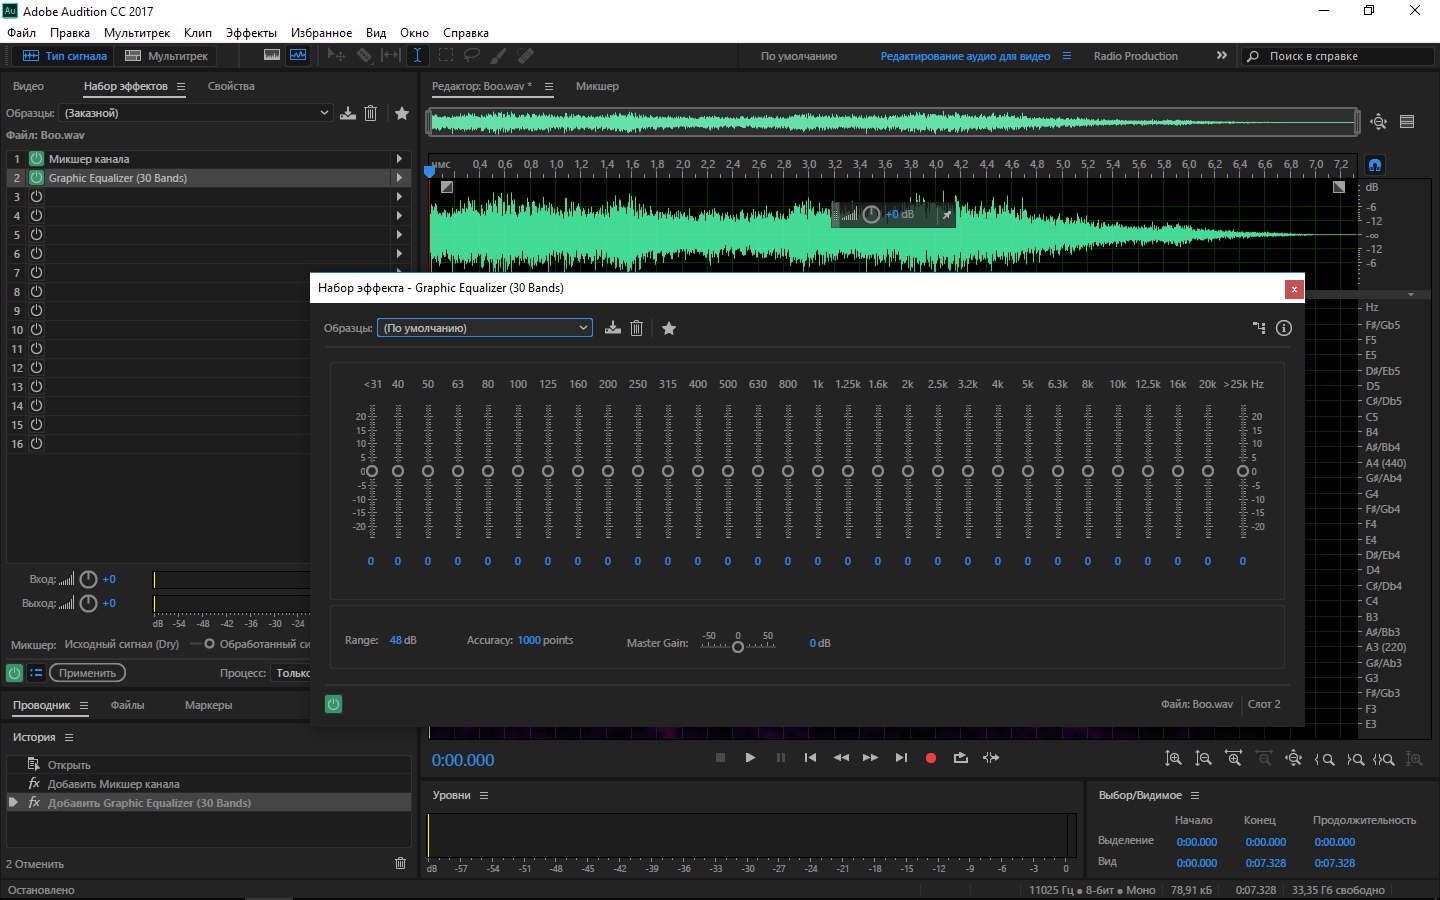 download adobe audition 1.5 free full version